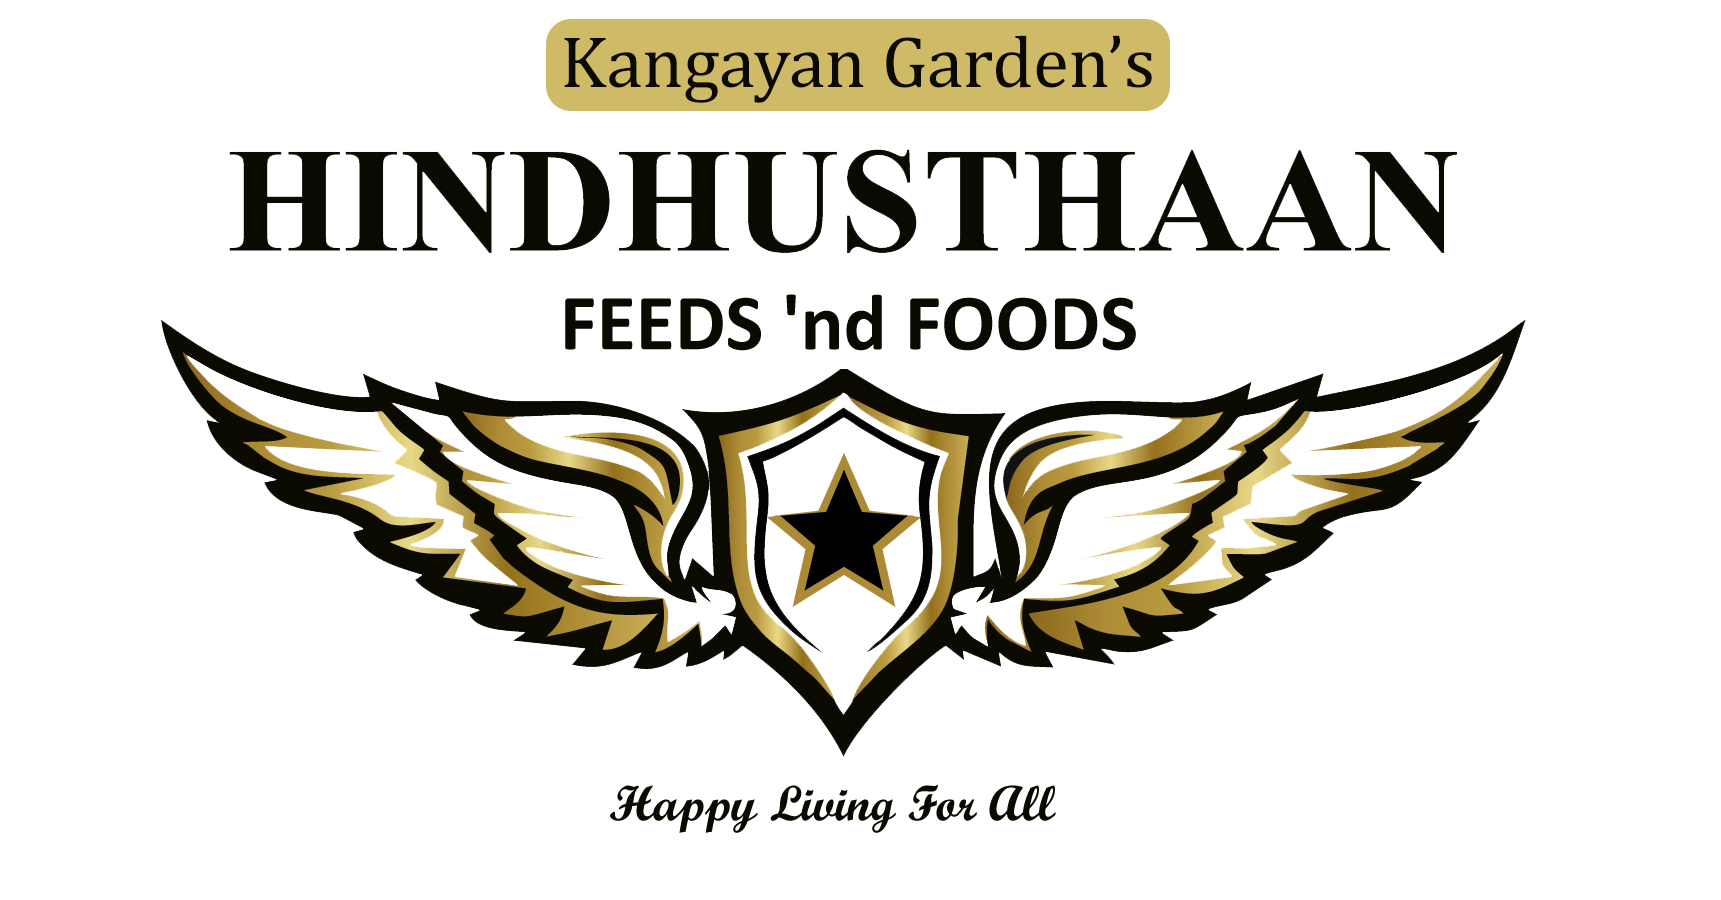 Hindhusthaan Cattle Feeds